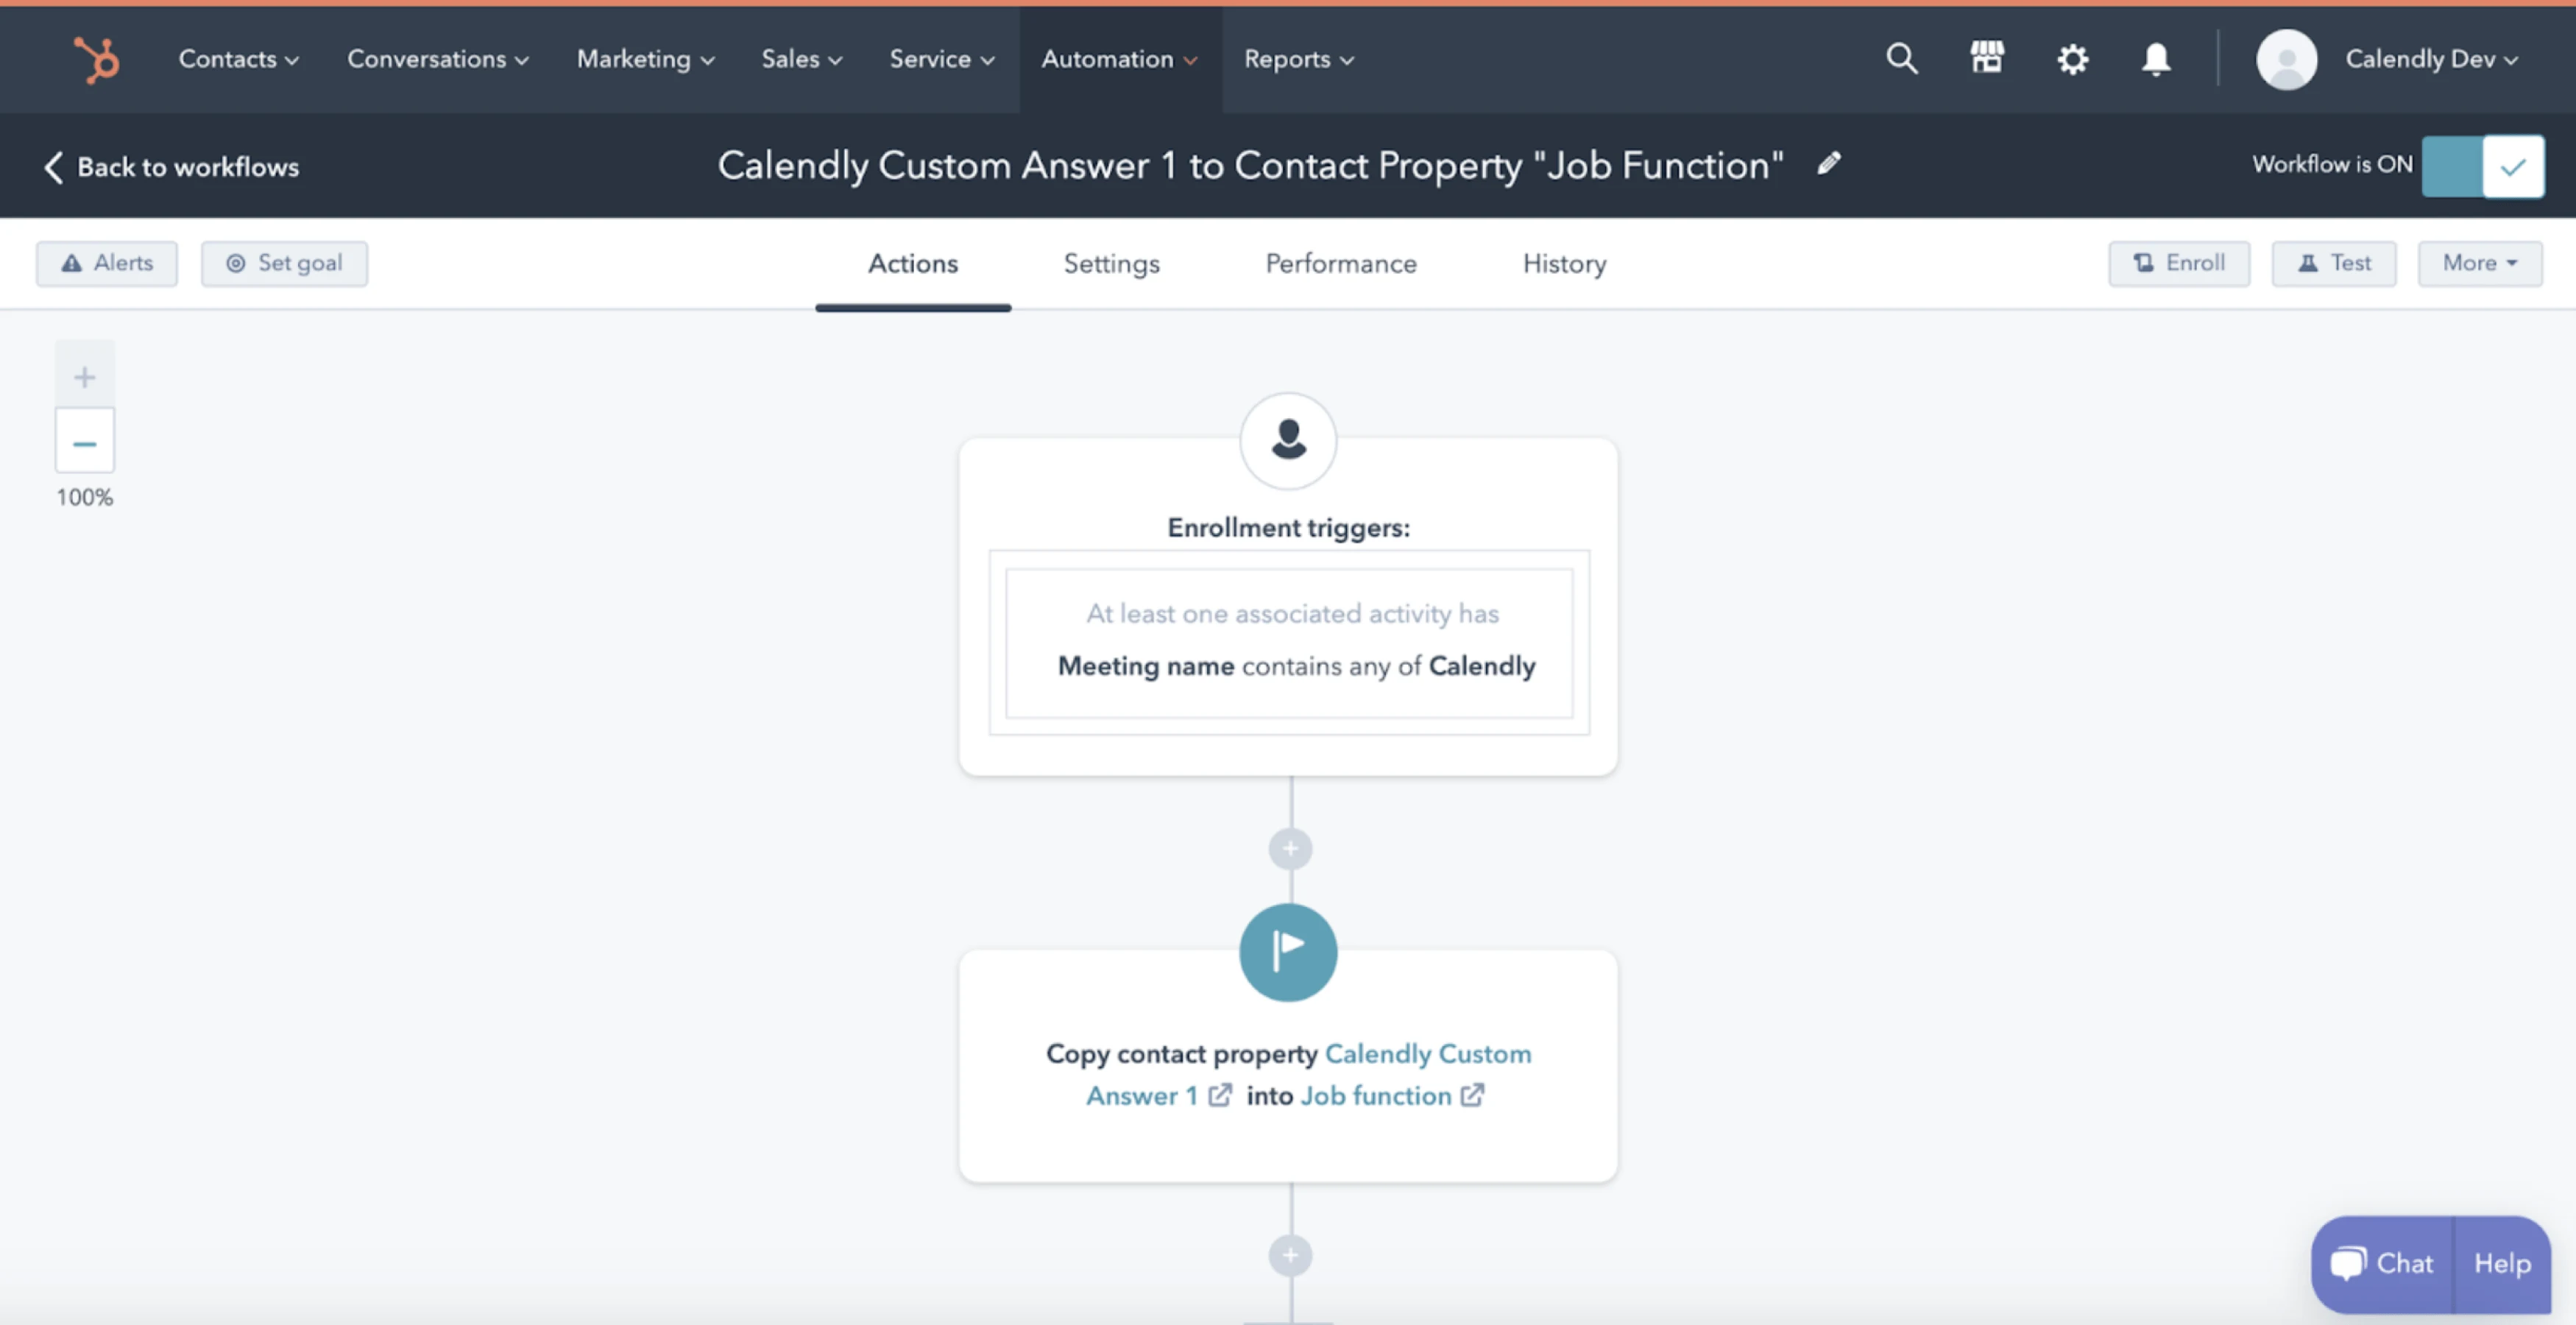 Screenshot example of a Hubspot/Calendly workflow: If a meeting name contains "Calendly," copy contact property X into Y.